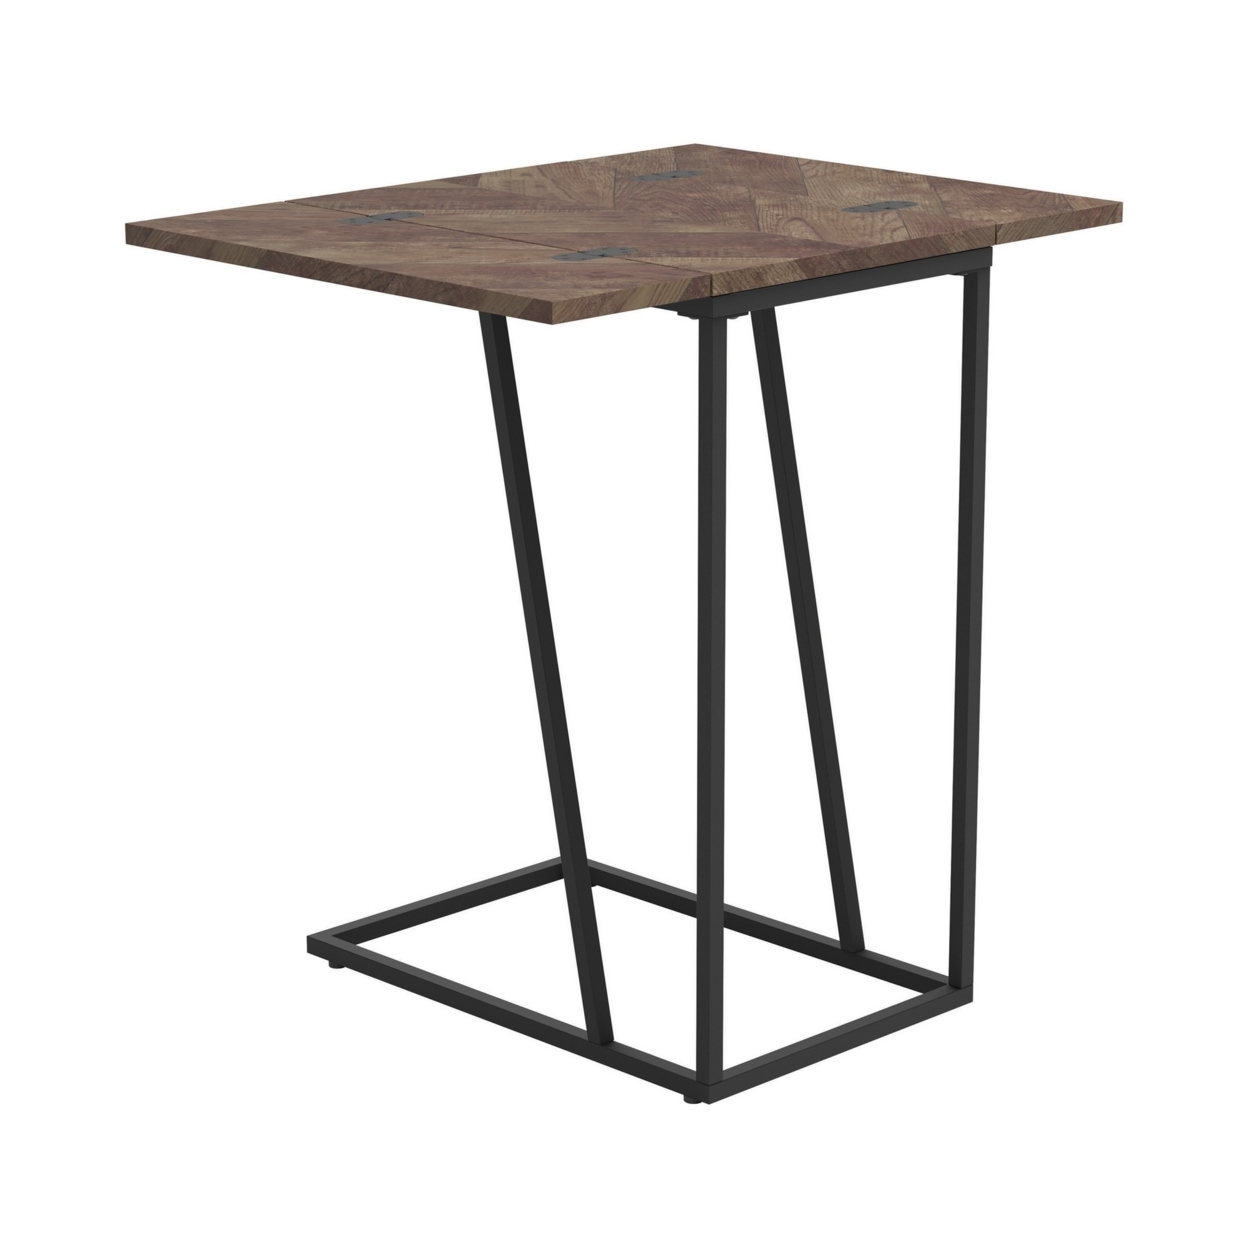 Accent Table With Wooden Extendable Top And Metal Frame, Brown And Black- Saltoro Sherpi